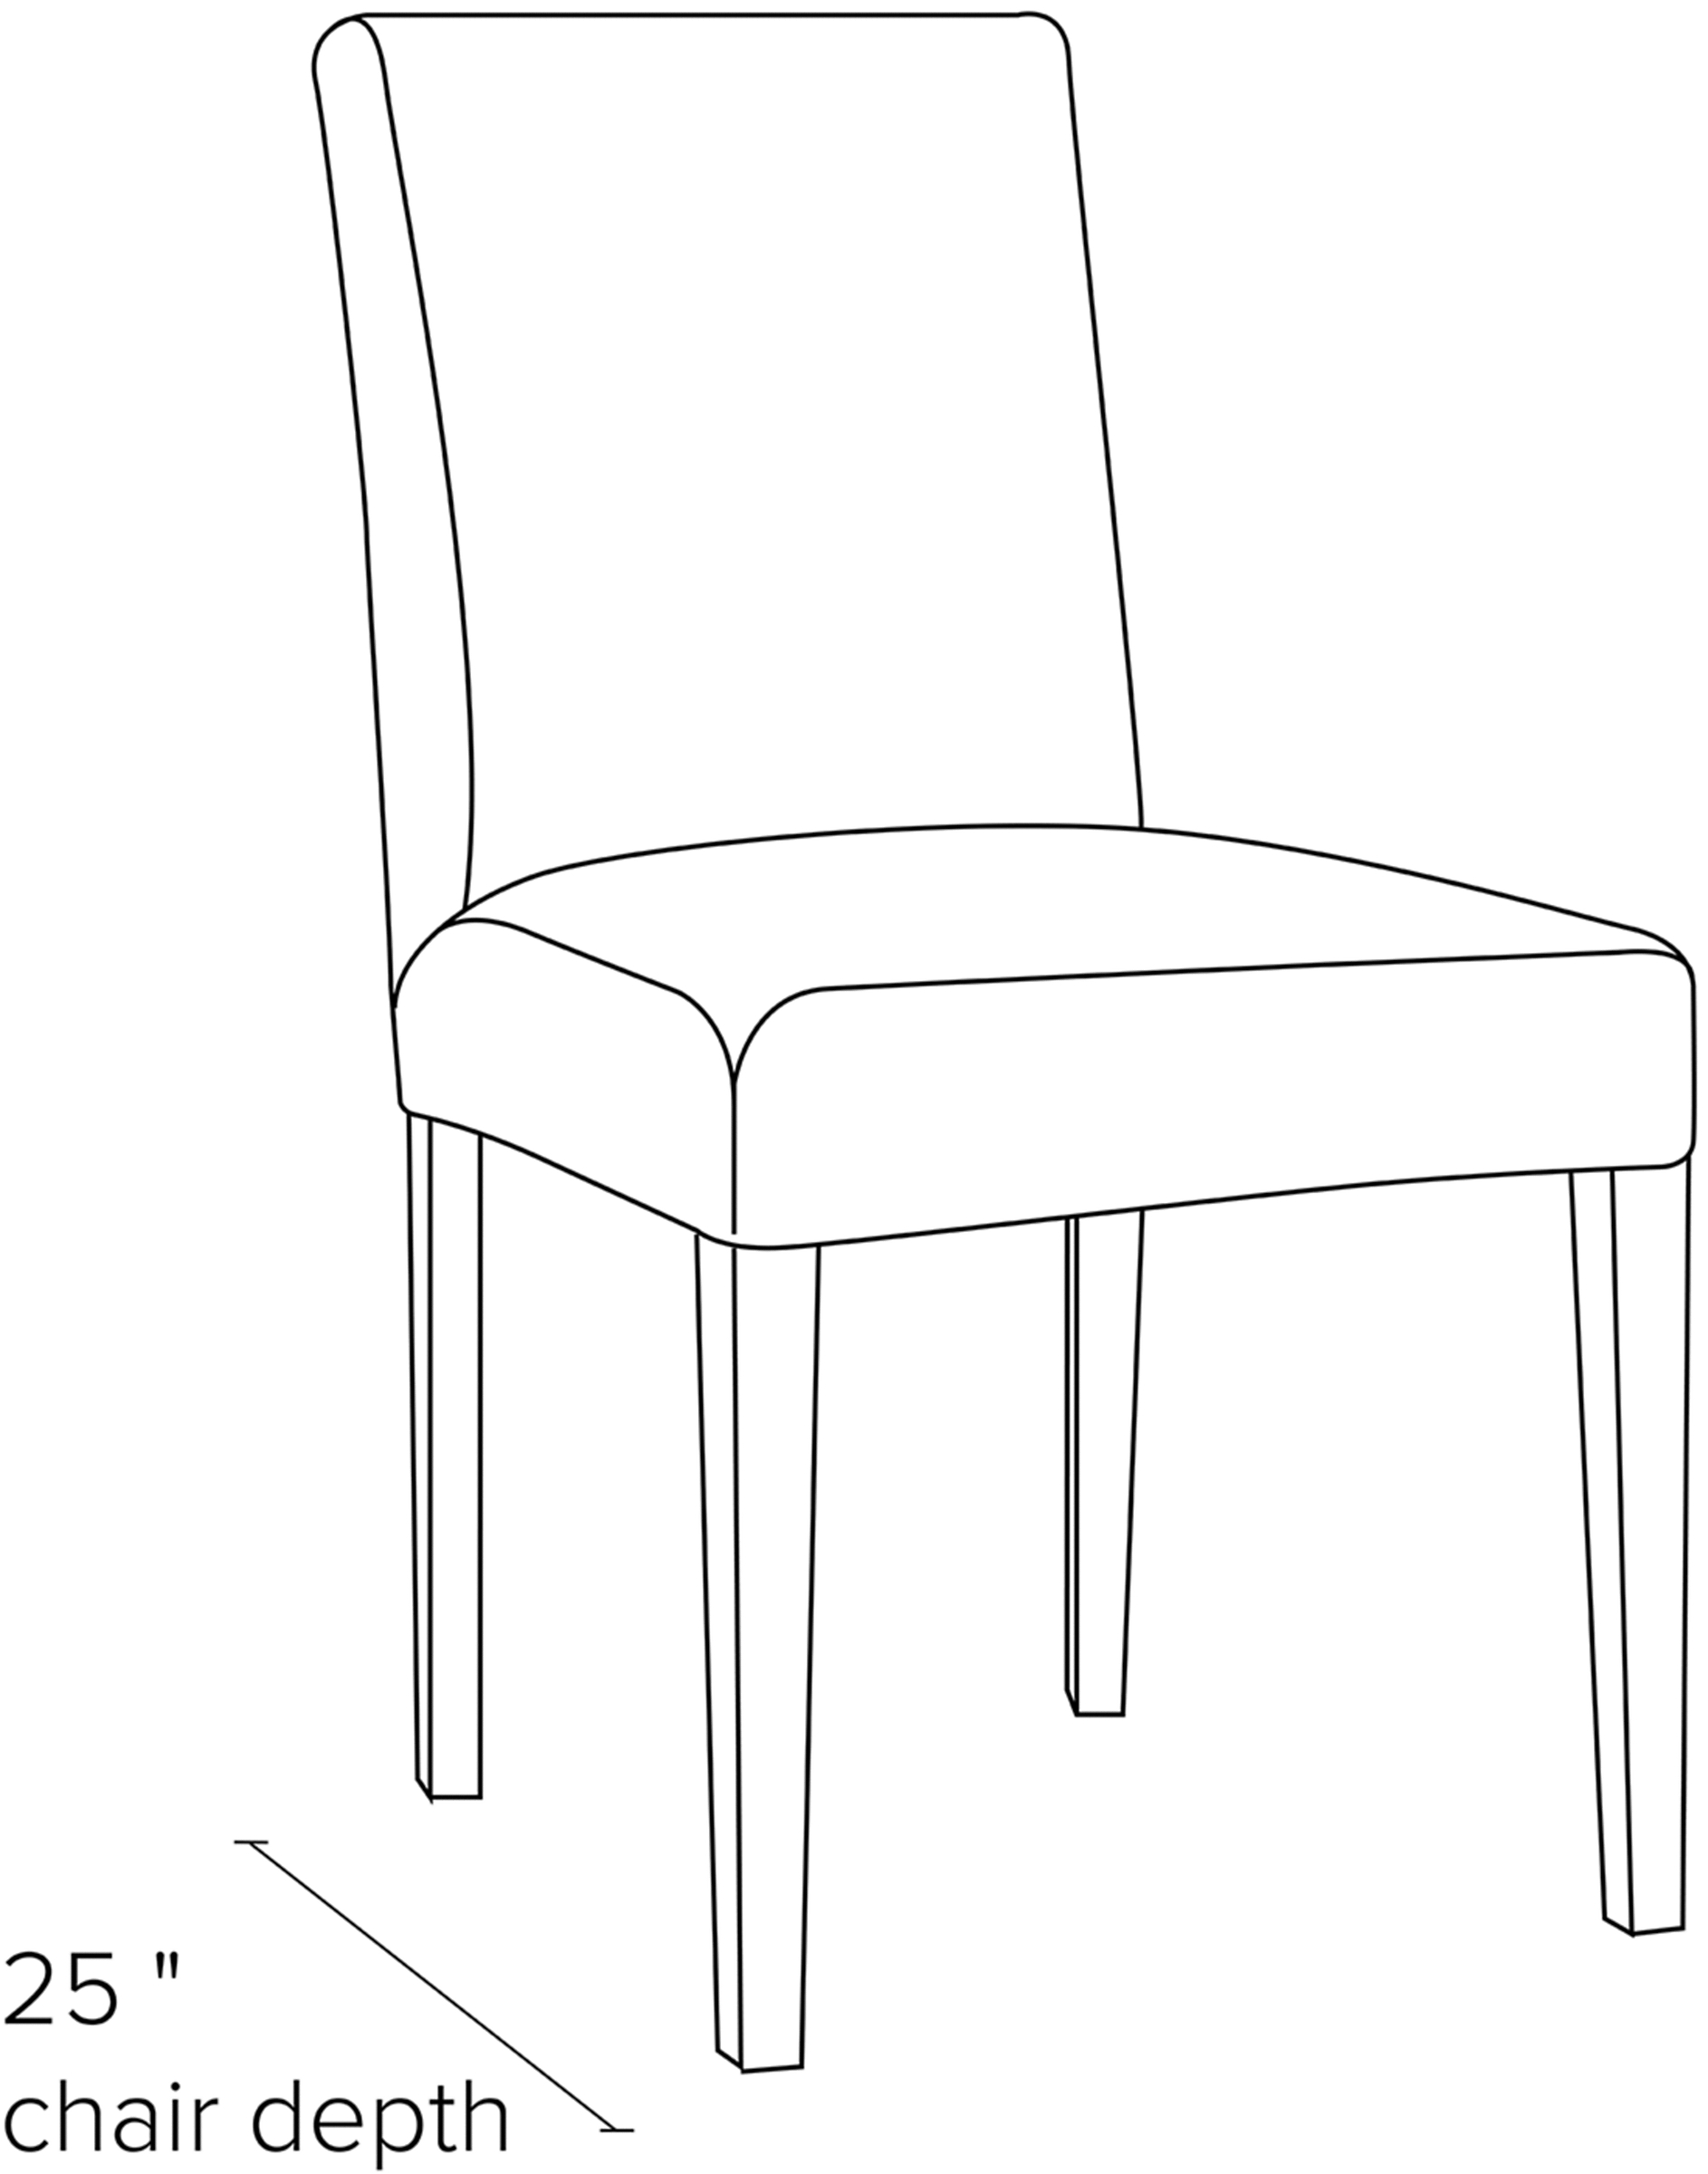 Side view dimension illustration of Peyton side chair.